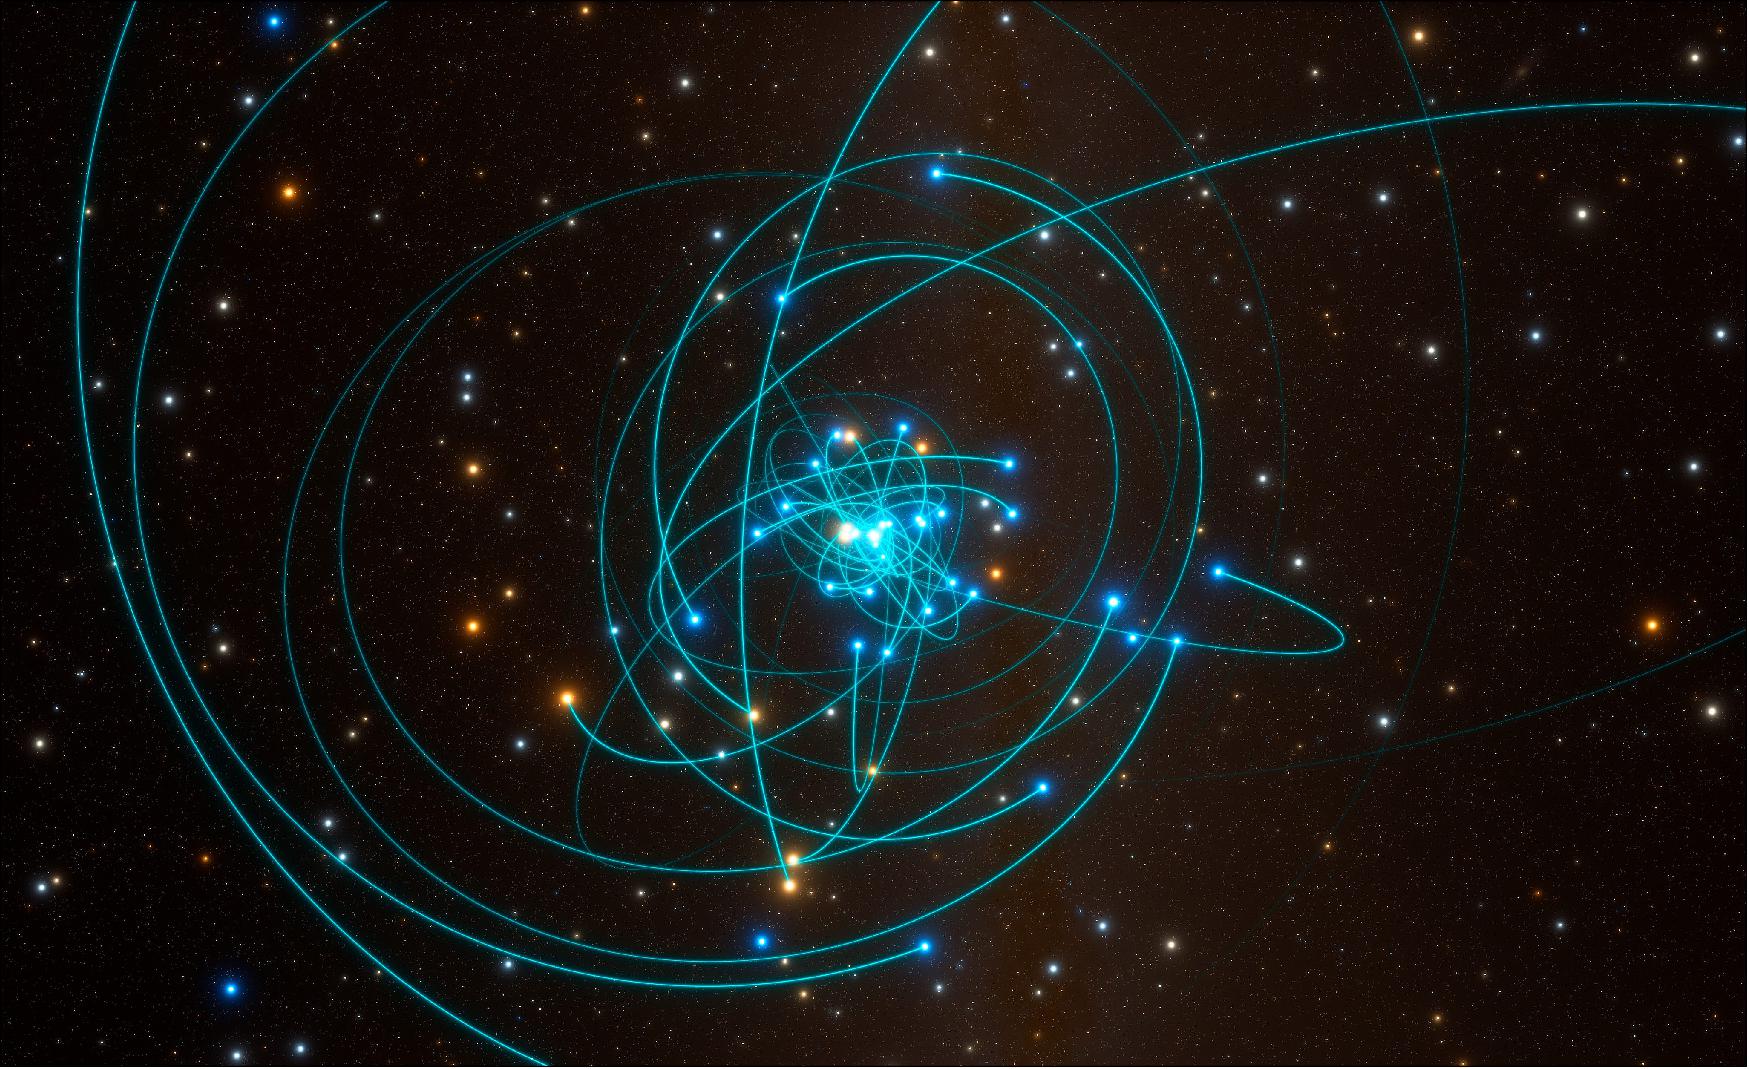 Figure 55: This simulation shows the orbits of stars very close to the supermassive black hole at the heart of the Milky Way. One of these stars, named S2, orbits every 16 years and is passing very close to the black hole in May 2018. This is a perfect laboratory to test gravitational physics and specifically Einstein's general theory of relativity (image credit: ESO/L. Calçada/spaceengine.org)